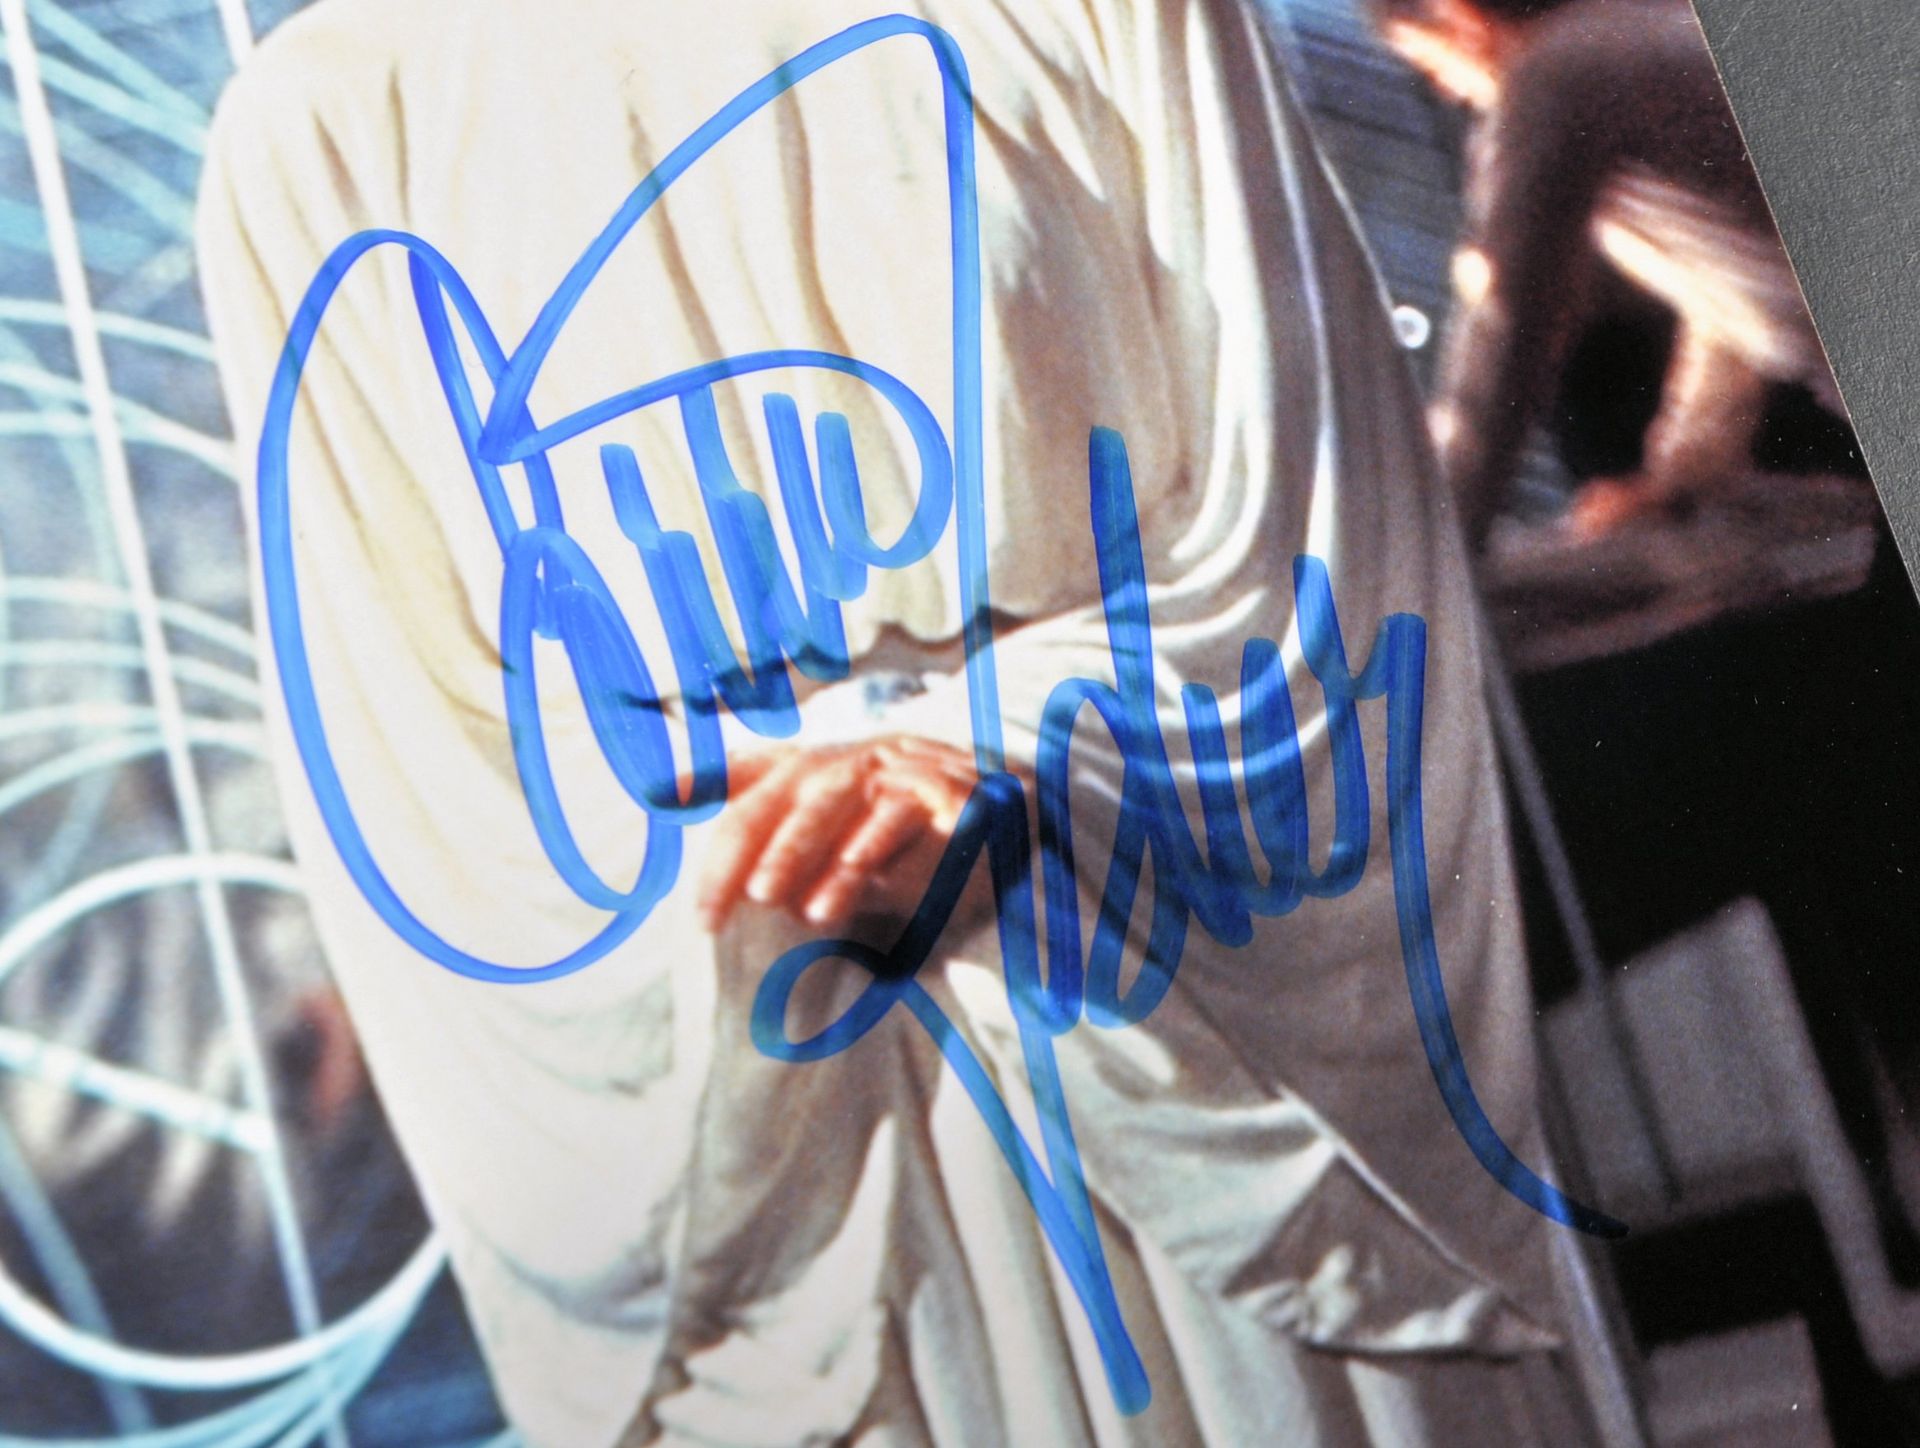 STAR WARS - CARRIE FISHER (1956-2016) - OFFICIAL SIGNED 8X10" PHOTO - Image 2 of 2